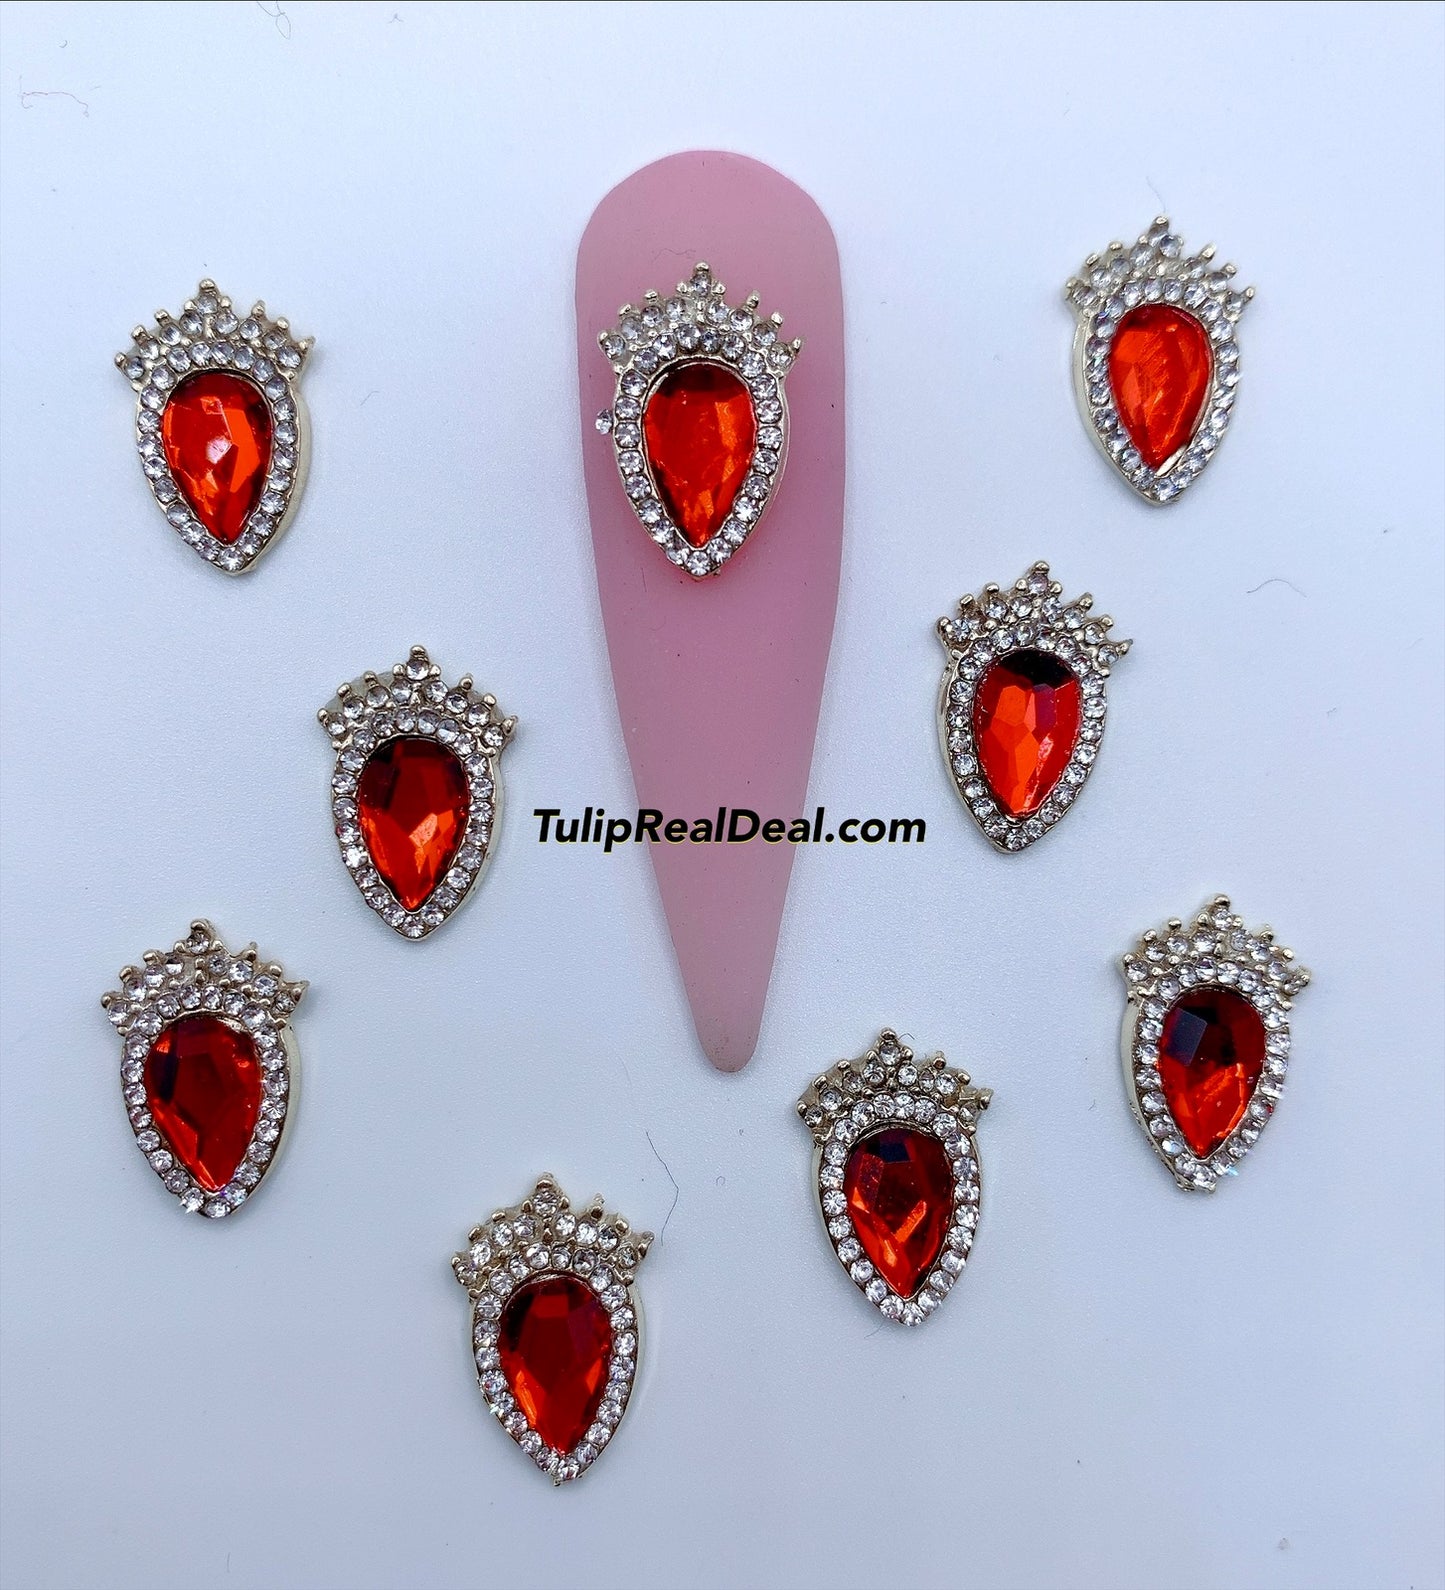 3D Fancy Red Crown Bling nail charms 5pcs